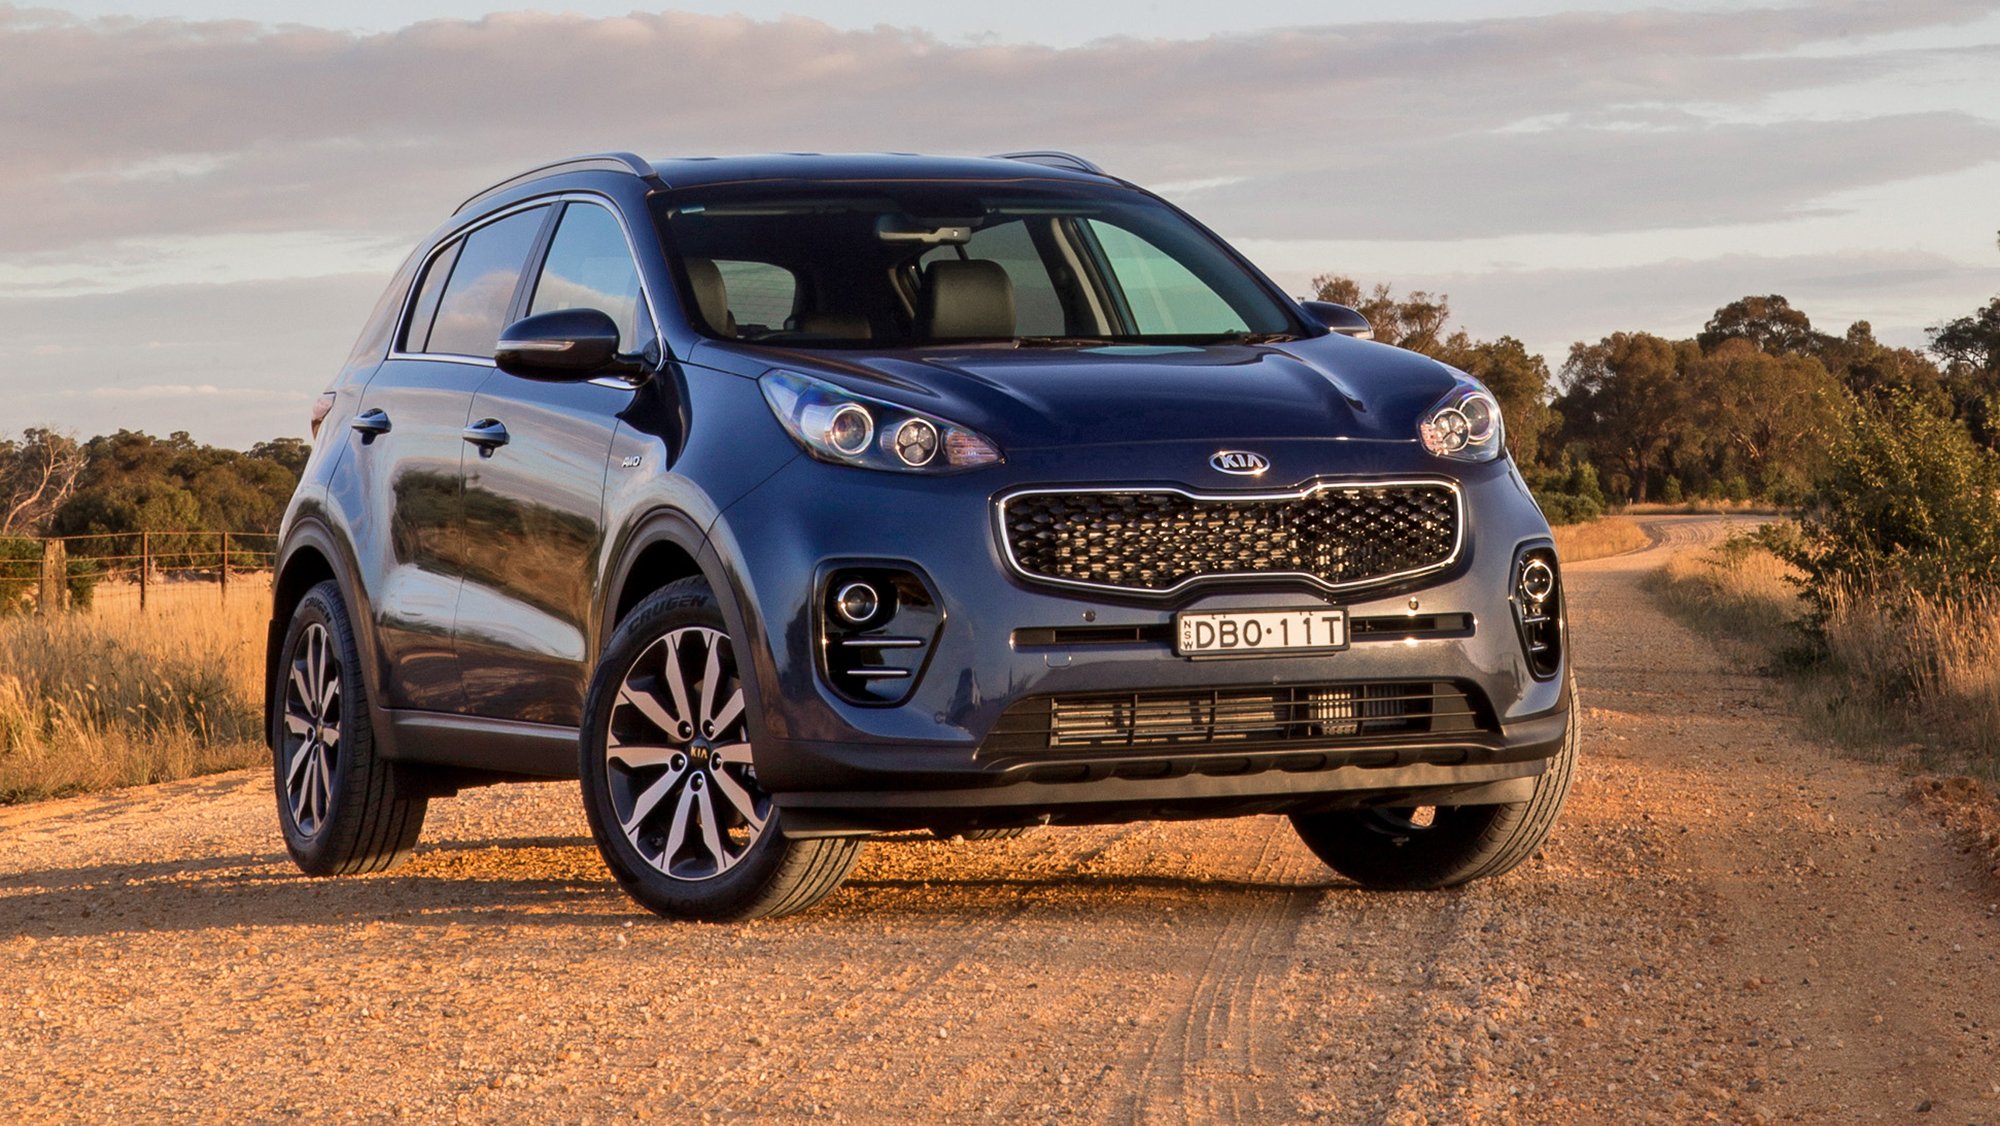 2016 Kia Sportage pricing and specifications photos